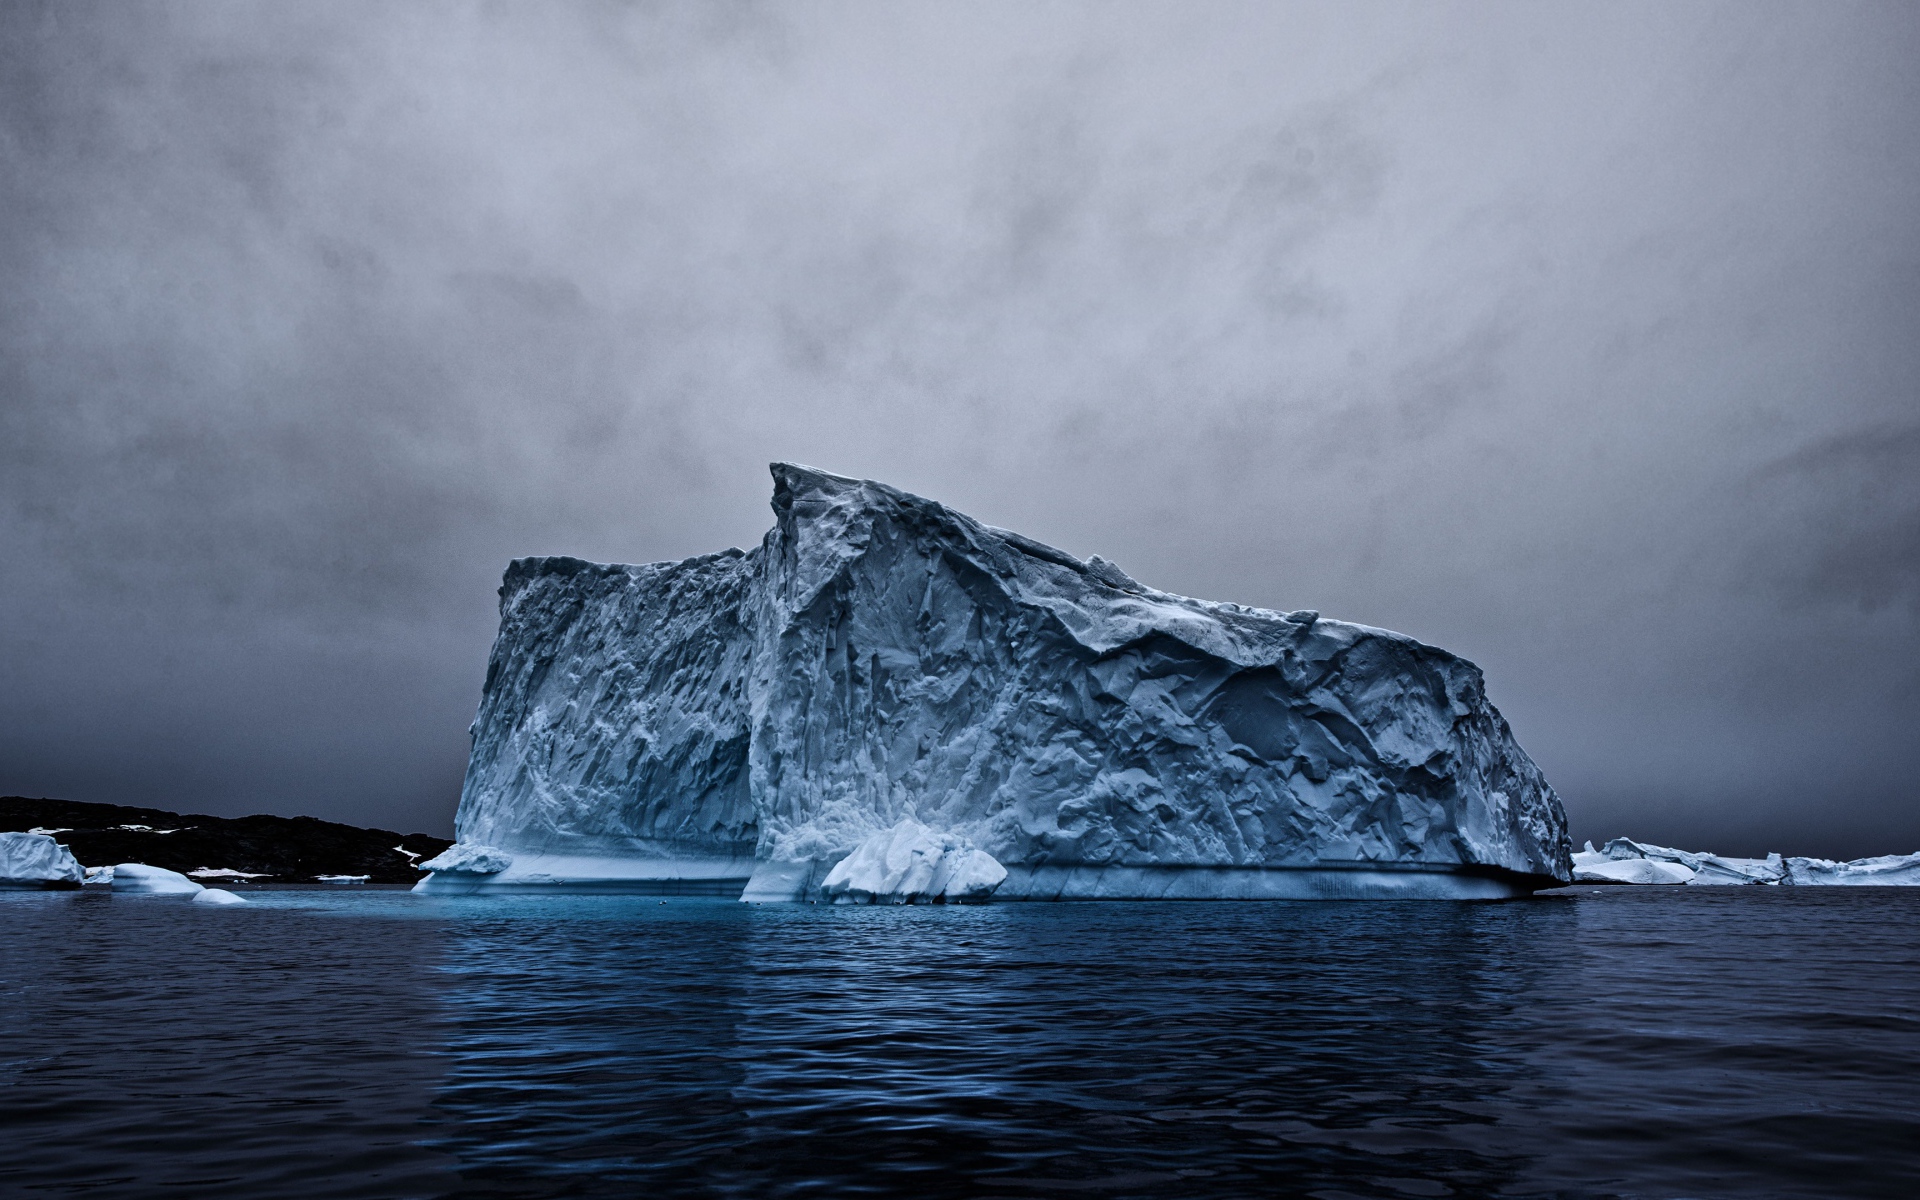 Large iceberg in the ocean under a cloudy sky